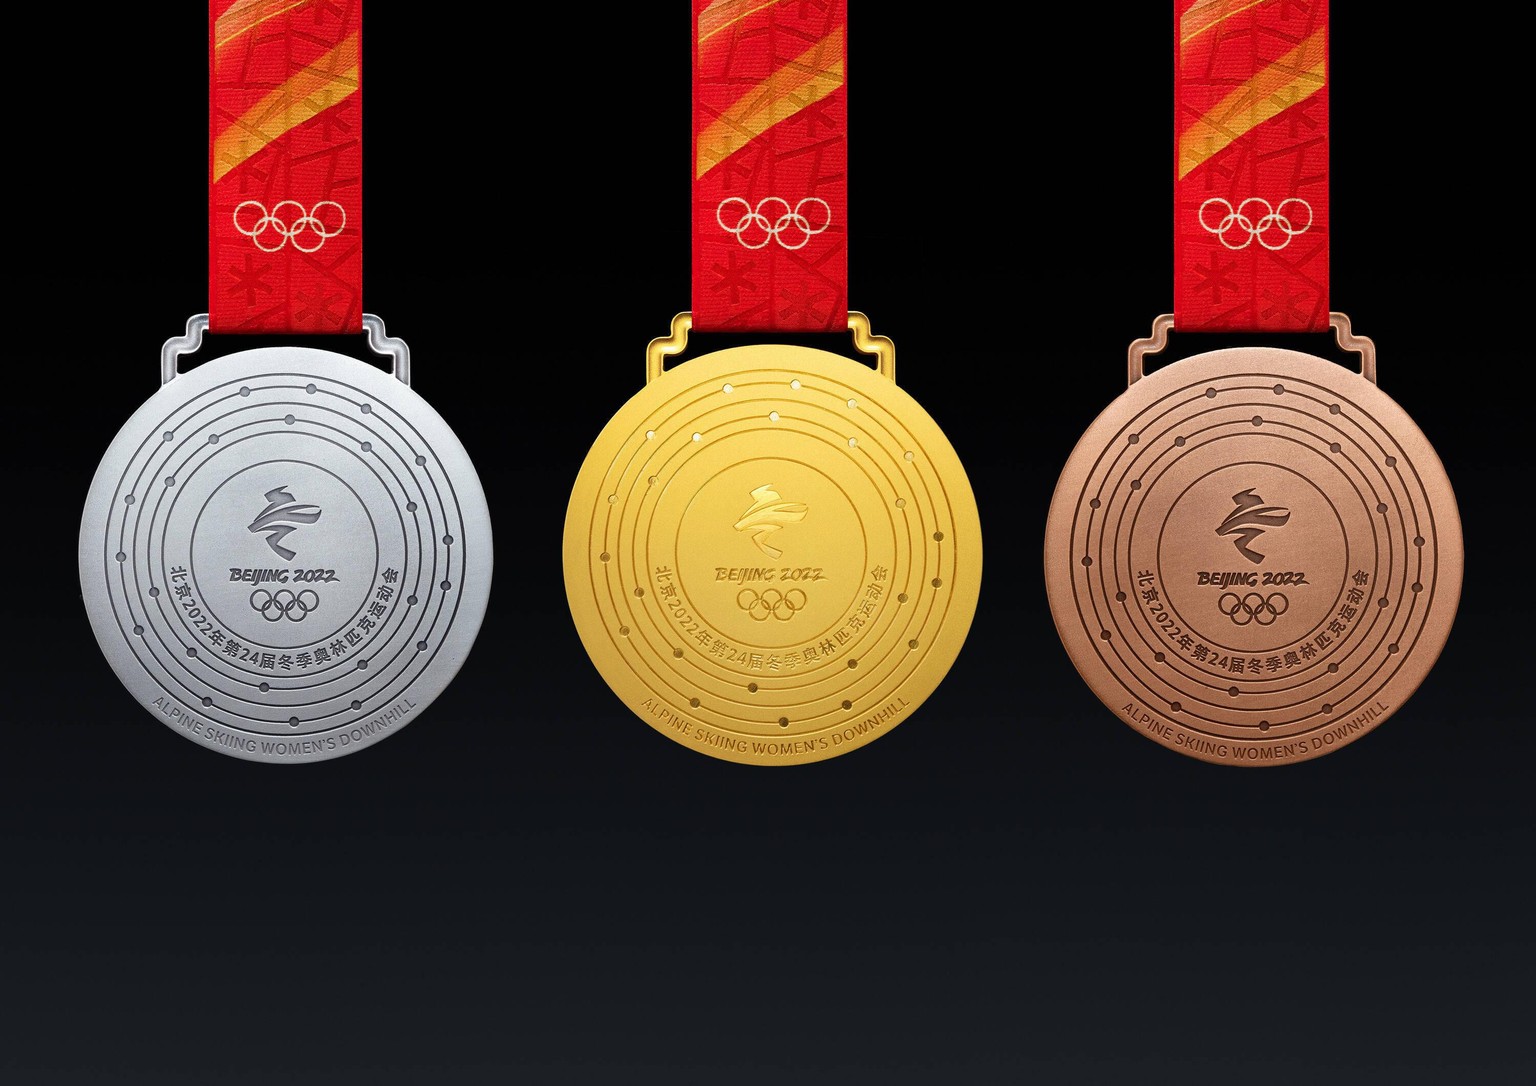 (211026) -- BEIJING, Oct. 26, 2021 -- Handout photo released on Oct. 26, 2021 shows the medals of Paralympic Winter games, Winterspiele,Spiele, Summer games Beijing celebrated the 100-day countdown to ...